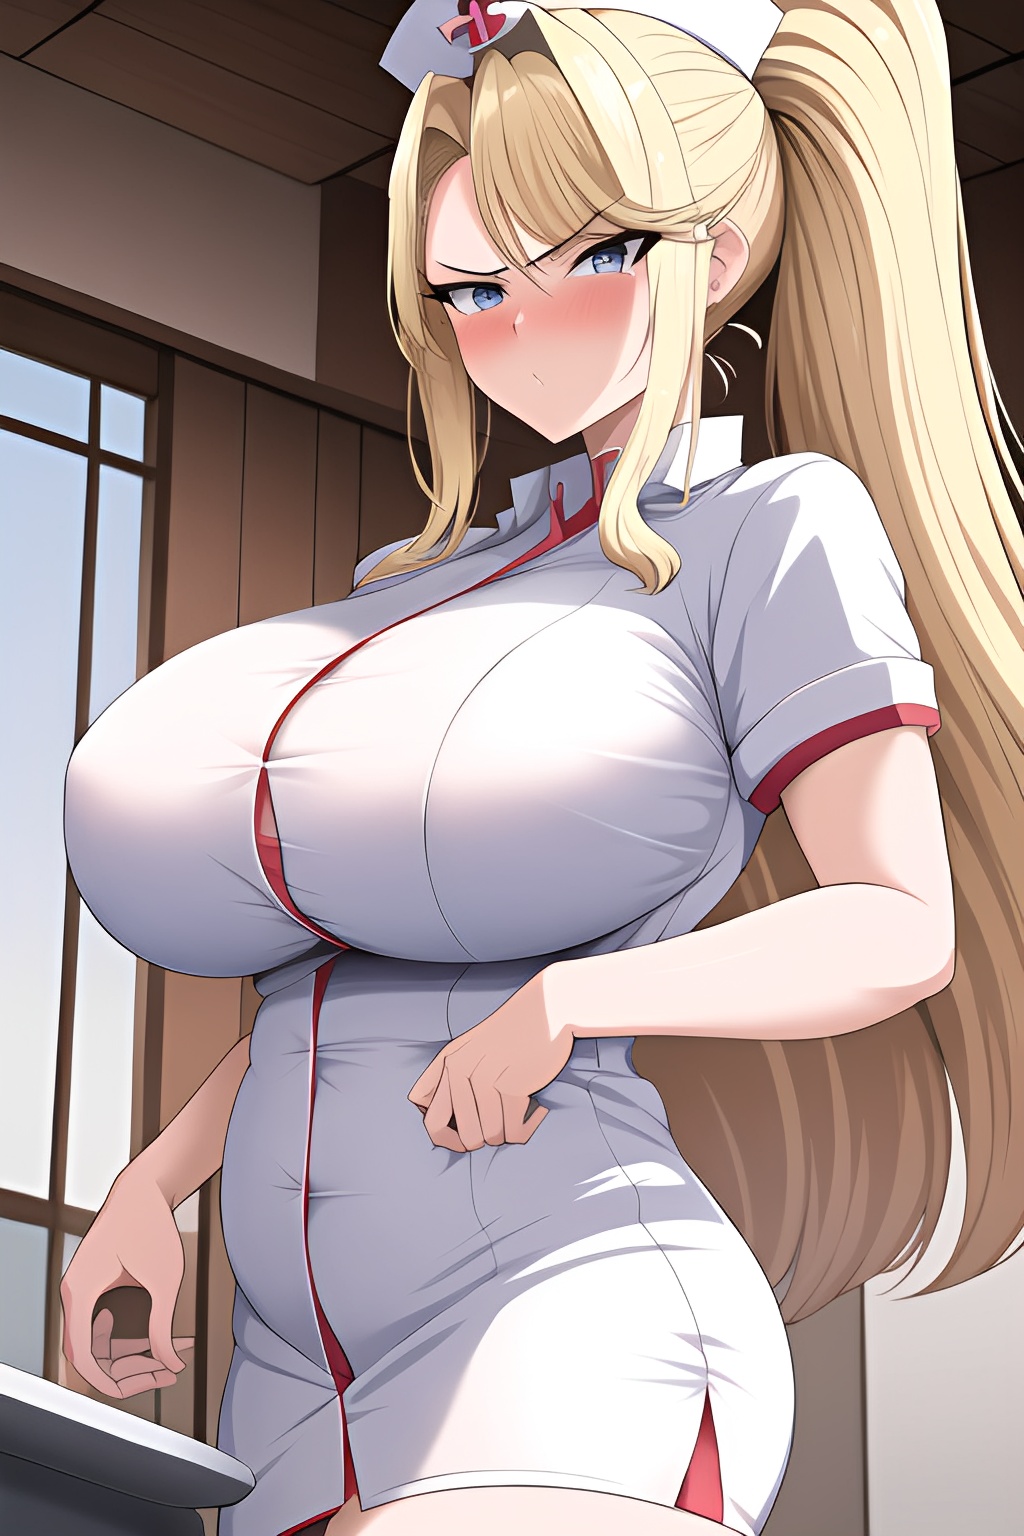 1024px x 1536px - Anime Busty Huge Boobs 60s Age Angry Face Blonde Slicked Hair Style Light  Skin Comic Yacht Close Up View Bathing Nurse - AI Hentai